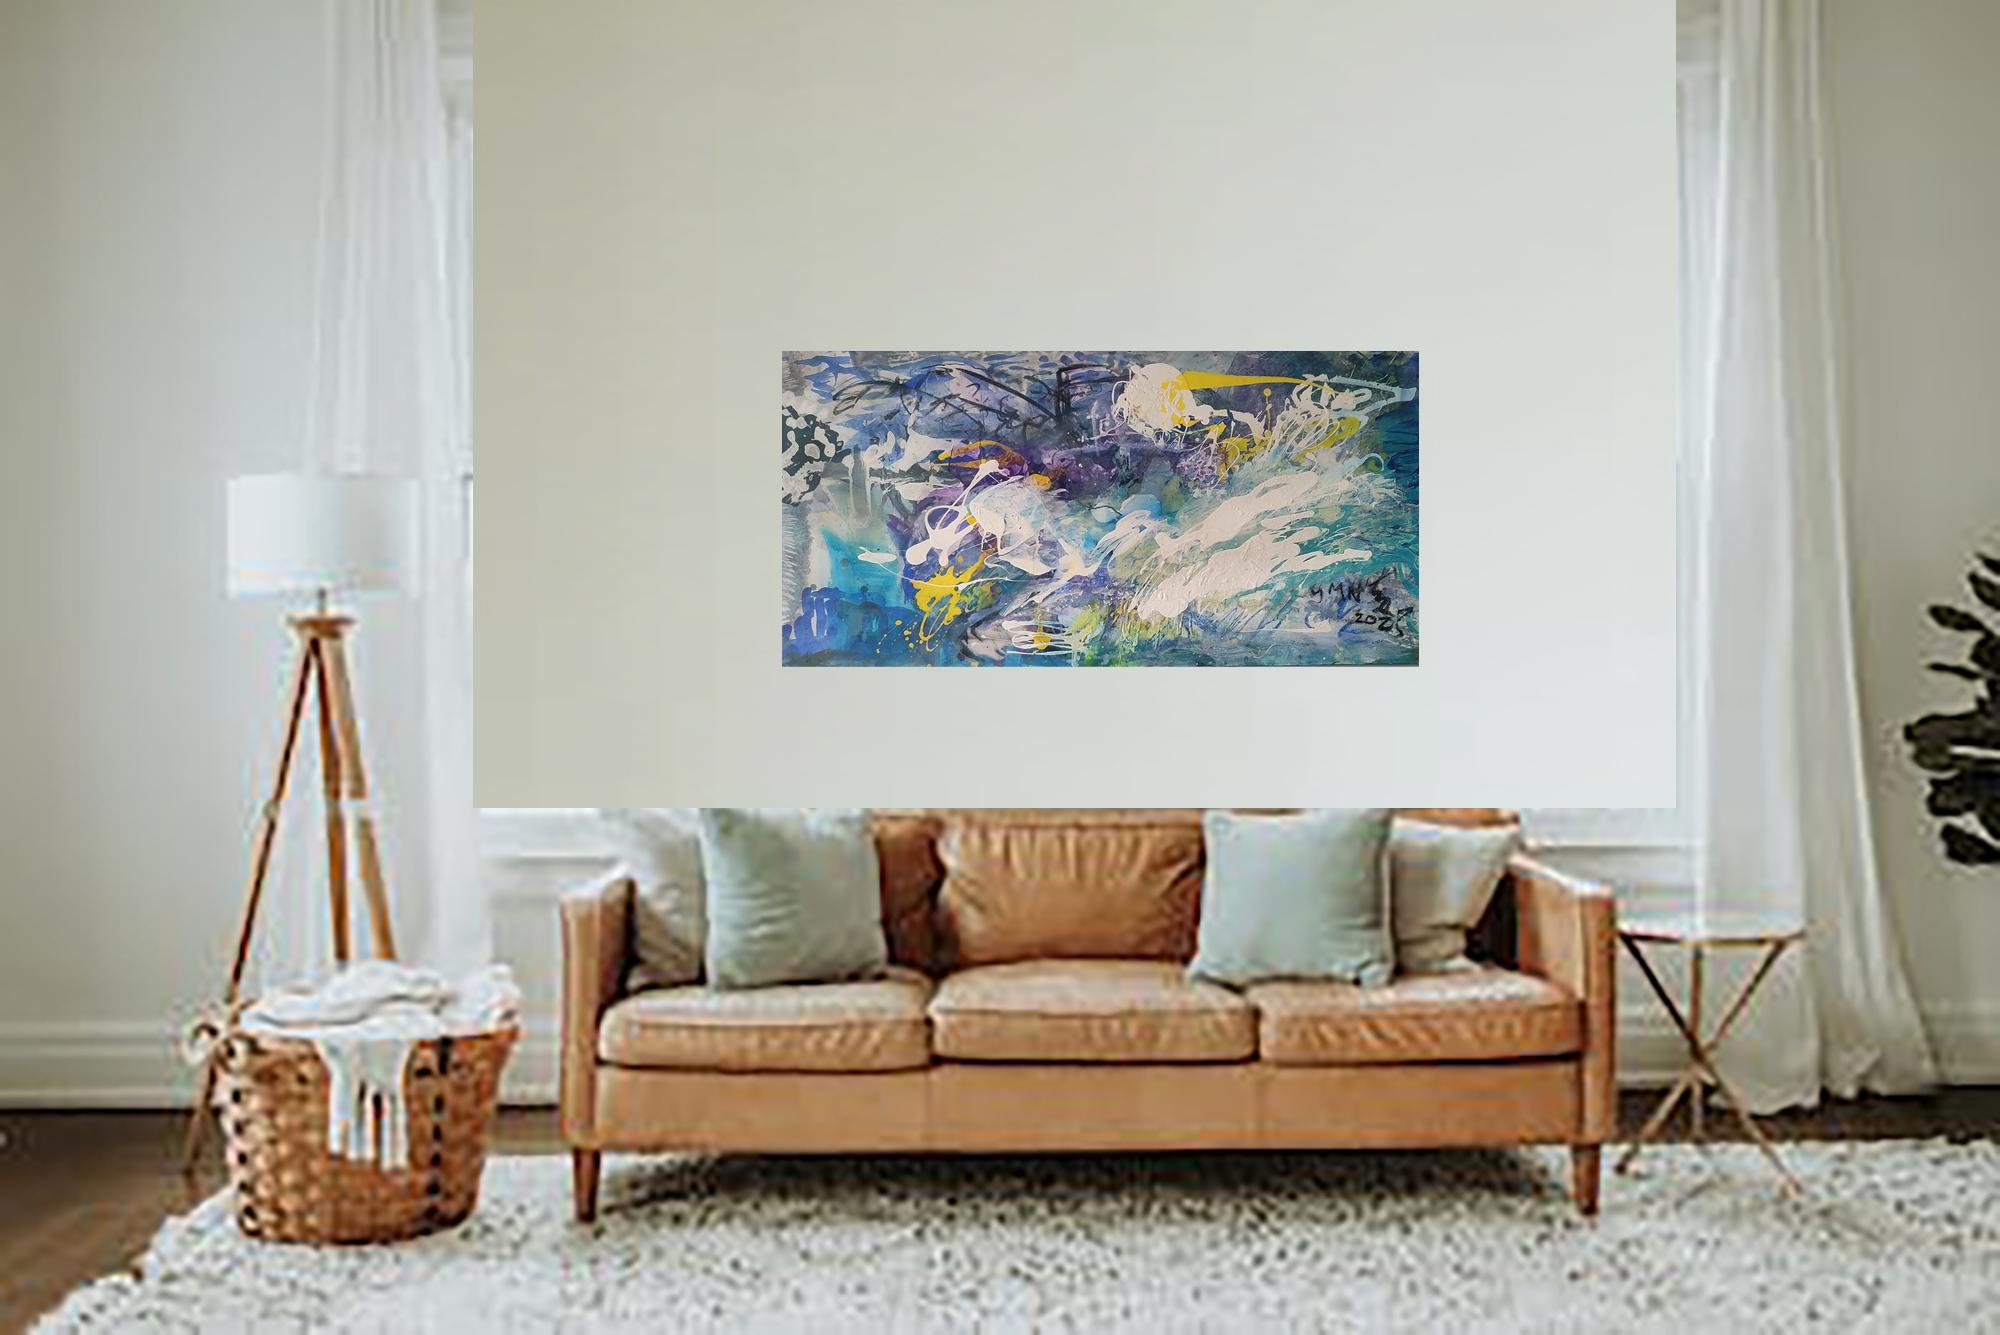 Space, beyond Faraway III - Abstract Expressionist Painting by Cymn Wong 